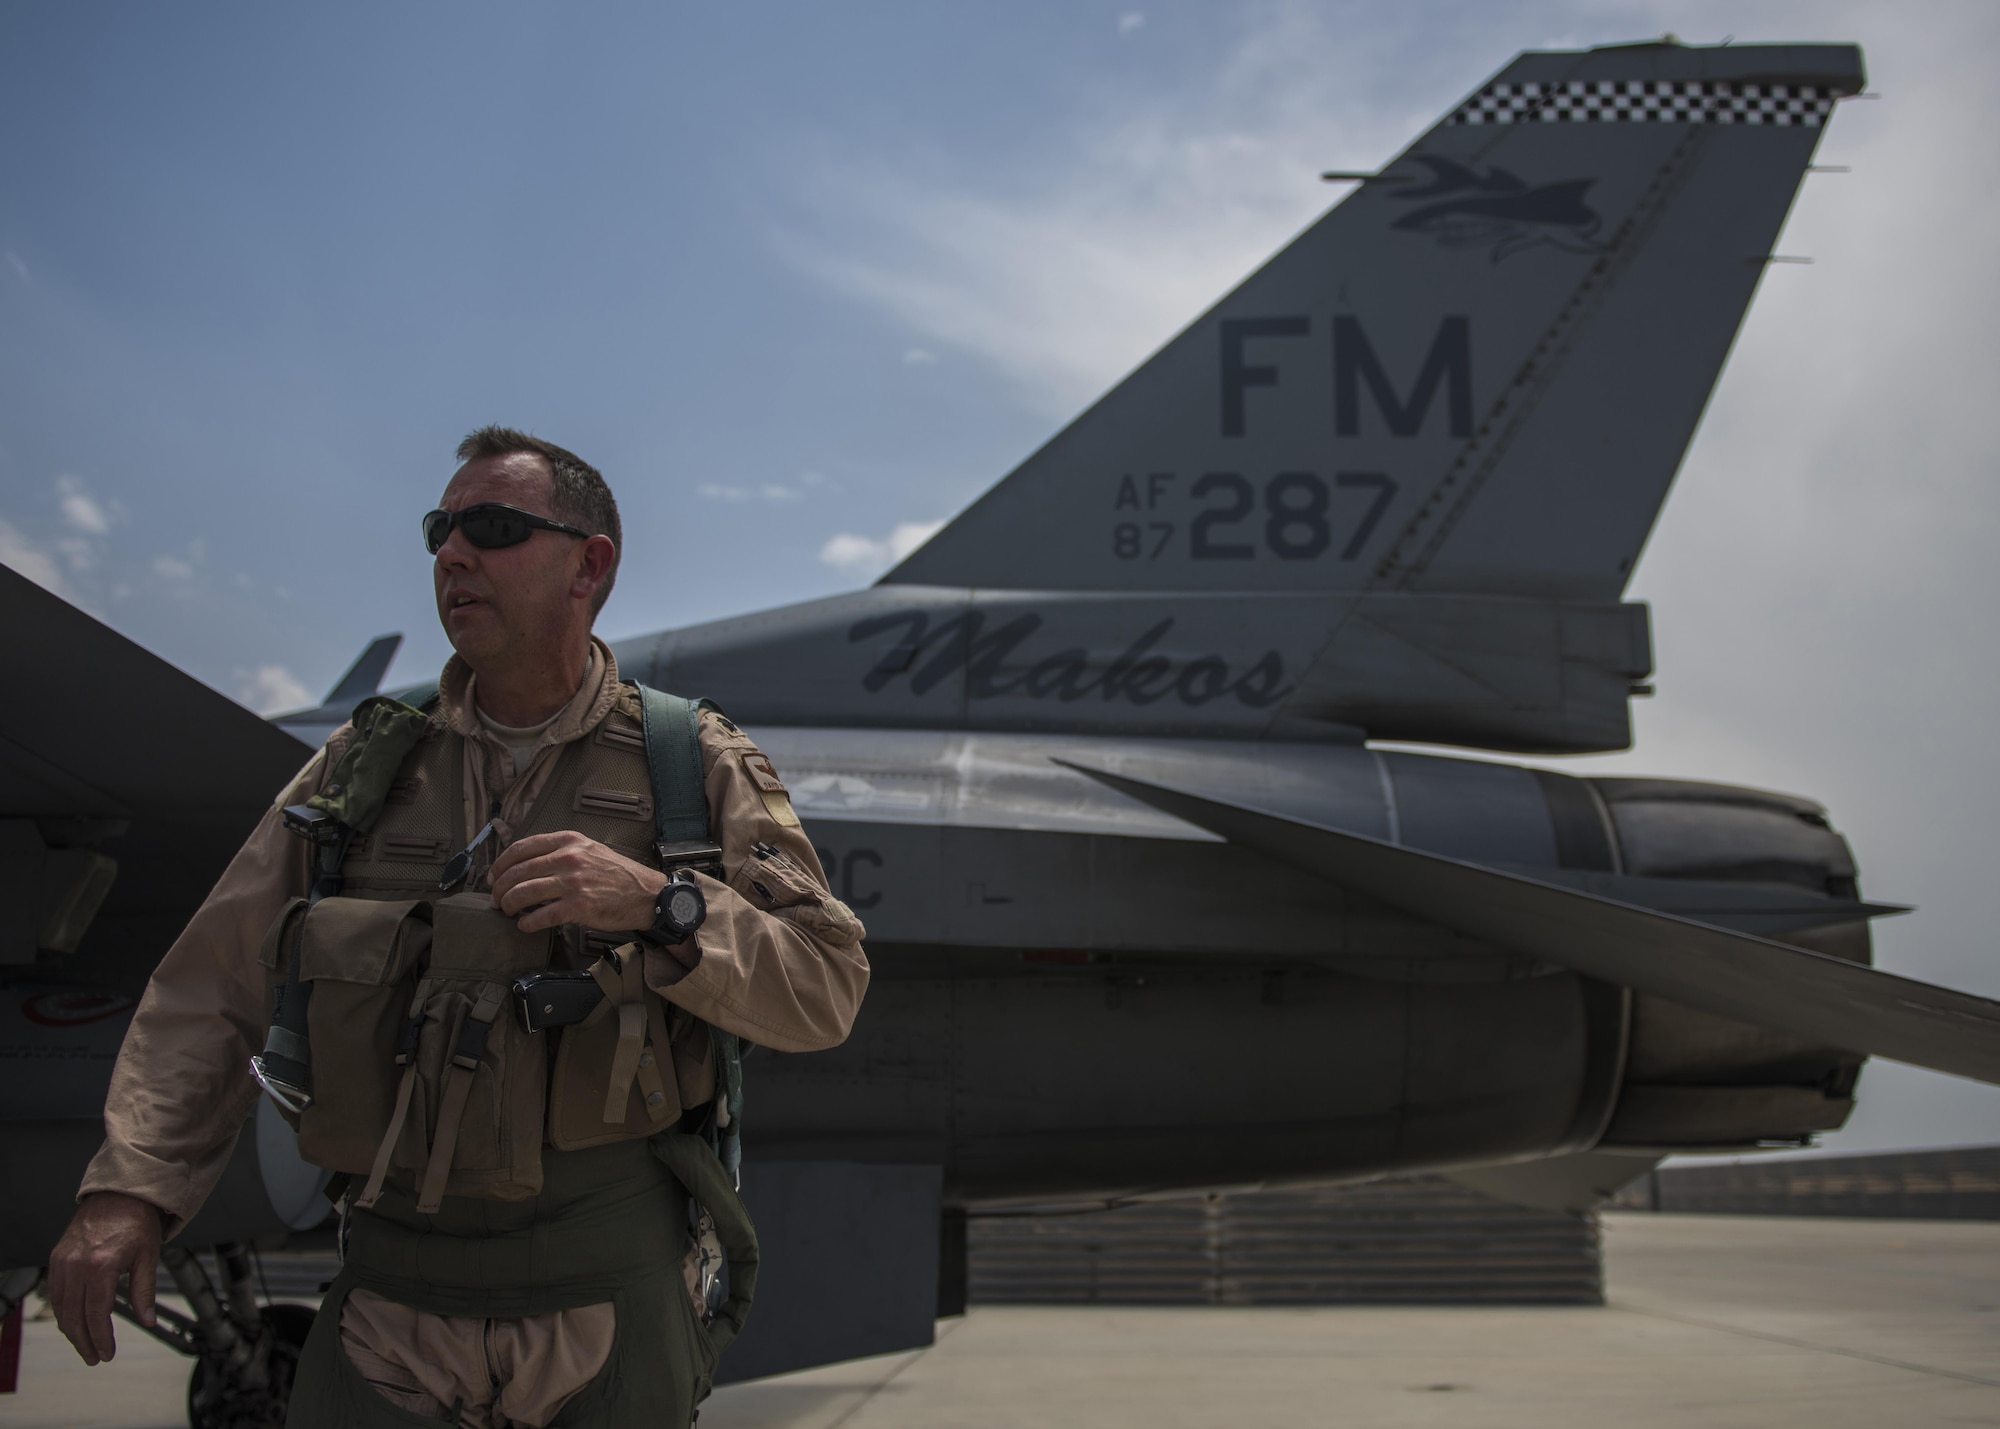 Lt. Col. David Efferson, 457th Expeditionary Fighter Squadron commander, conducts a pre-flight inspection of an F-16C Fighting Falcon, June 28, 2016, Bagram Airfield, Afghanistan. The aircraft receives inspections before takeoff and after landing to see if there are any maintenance issues with the aircraft. (U.S. Air Force photo by Senior Airman Justyn M. Freeman)